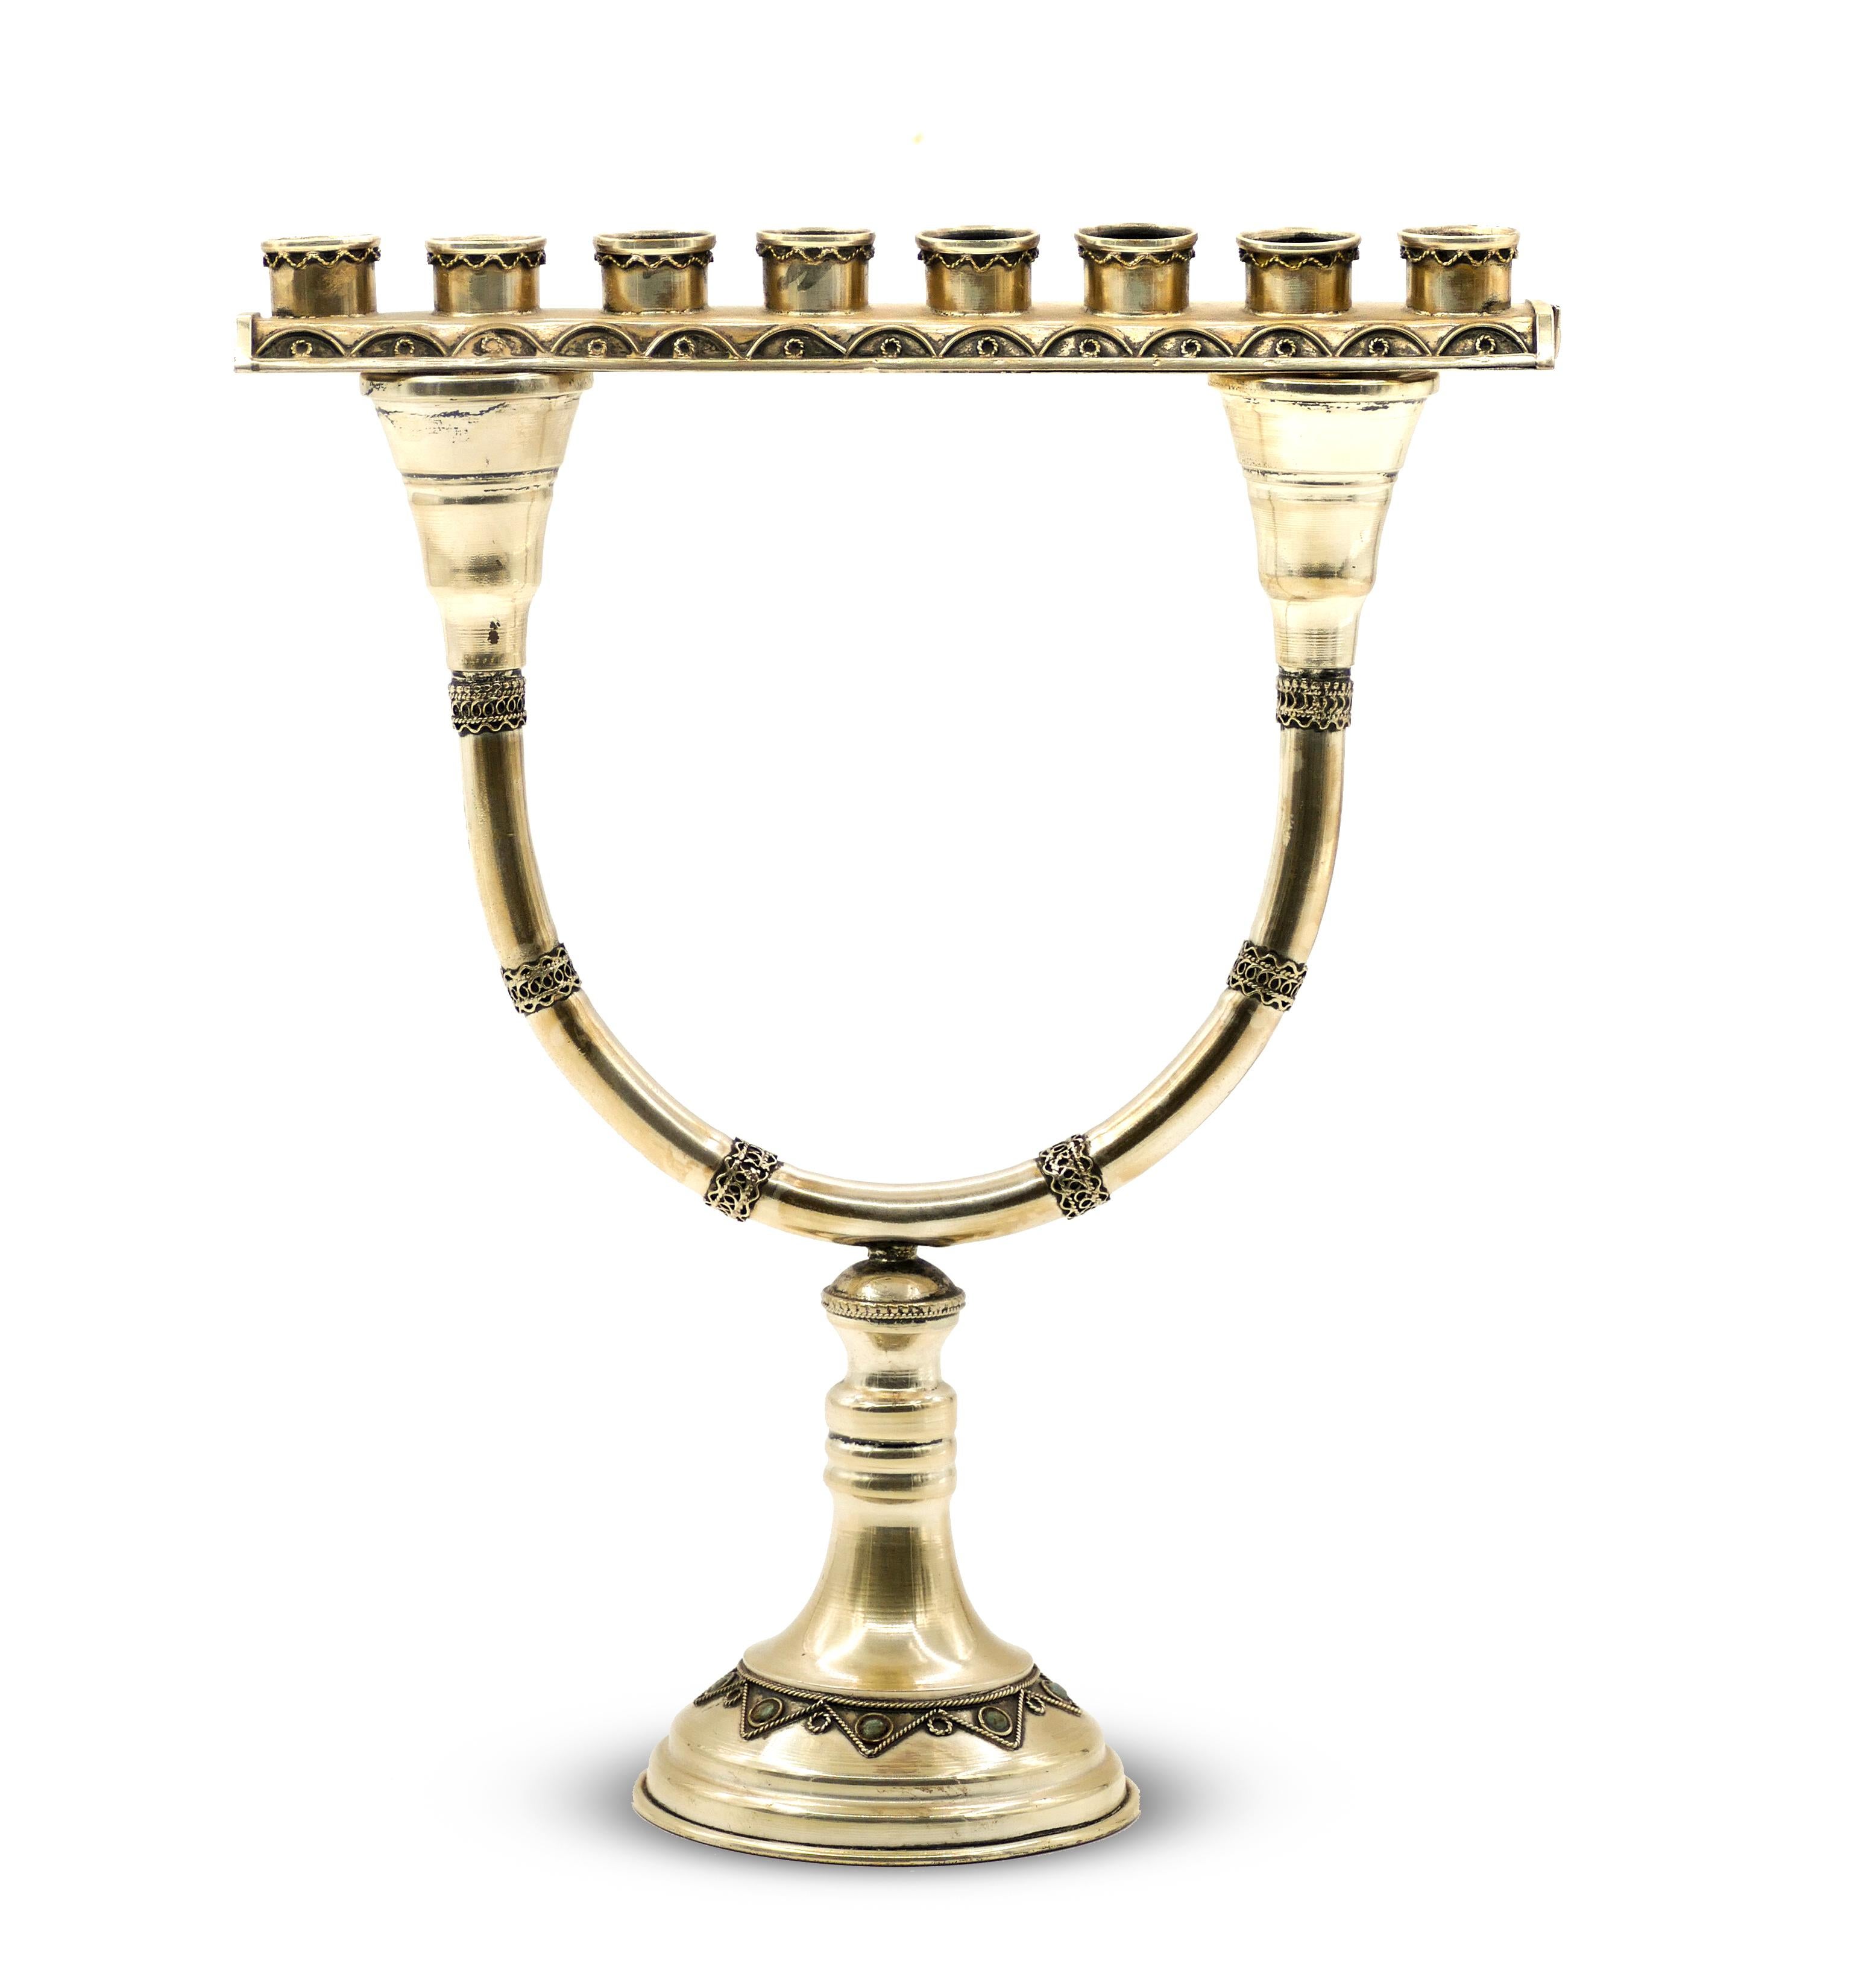 This Hannukkah Menorah silver plated candlestick produced in 20th century, is composed by two parts: the base is a two-arm candlestick, on which a straight attachment with eight burners can be fixed.

Simple decorations in silver threads with